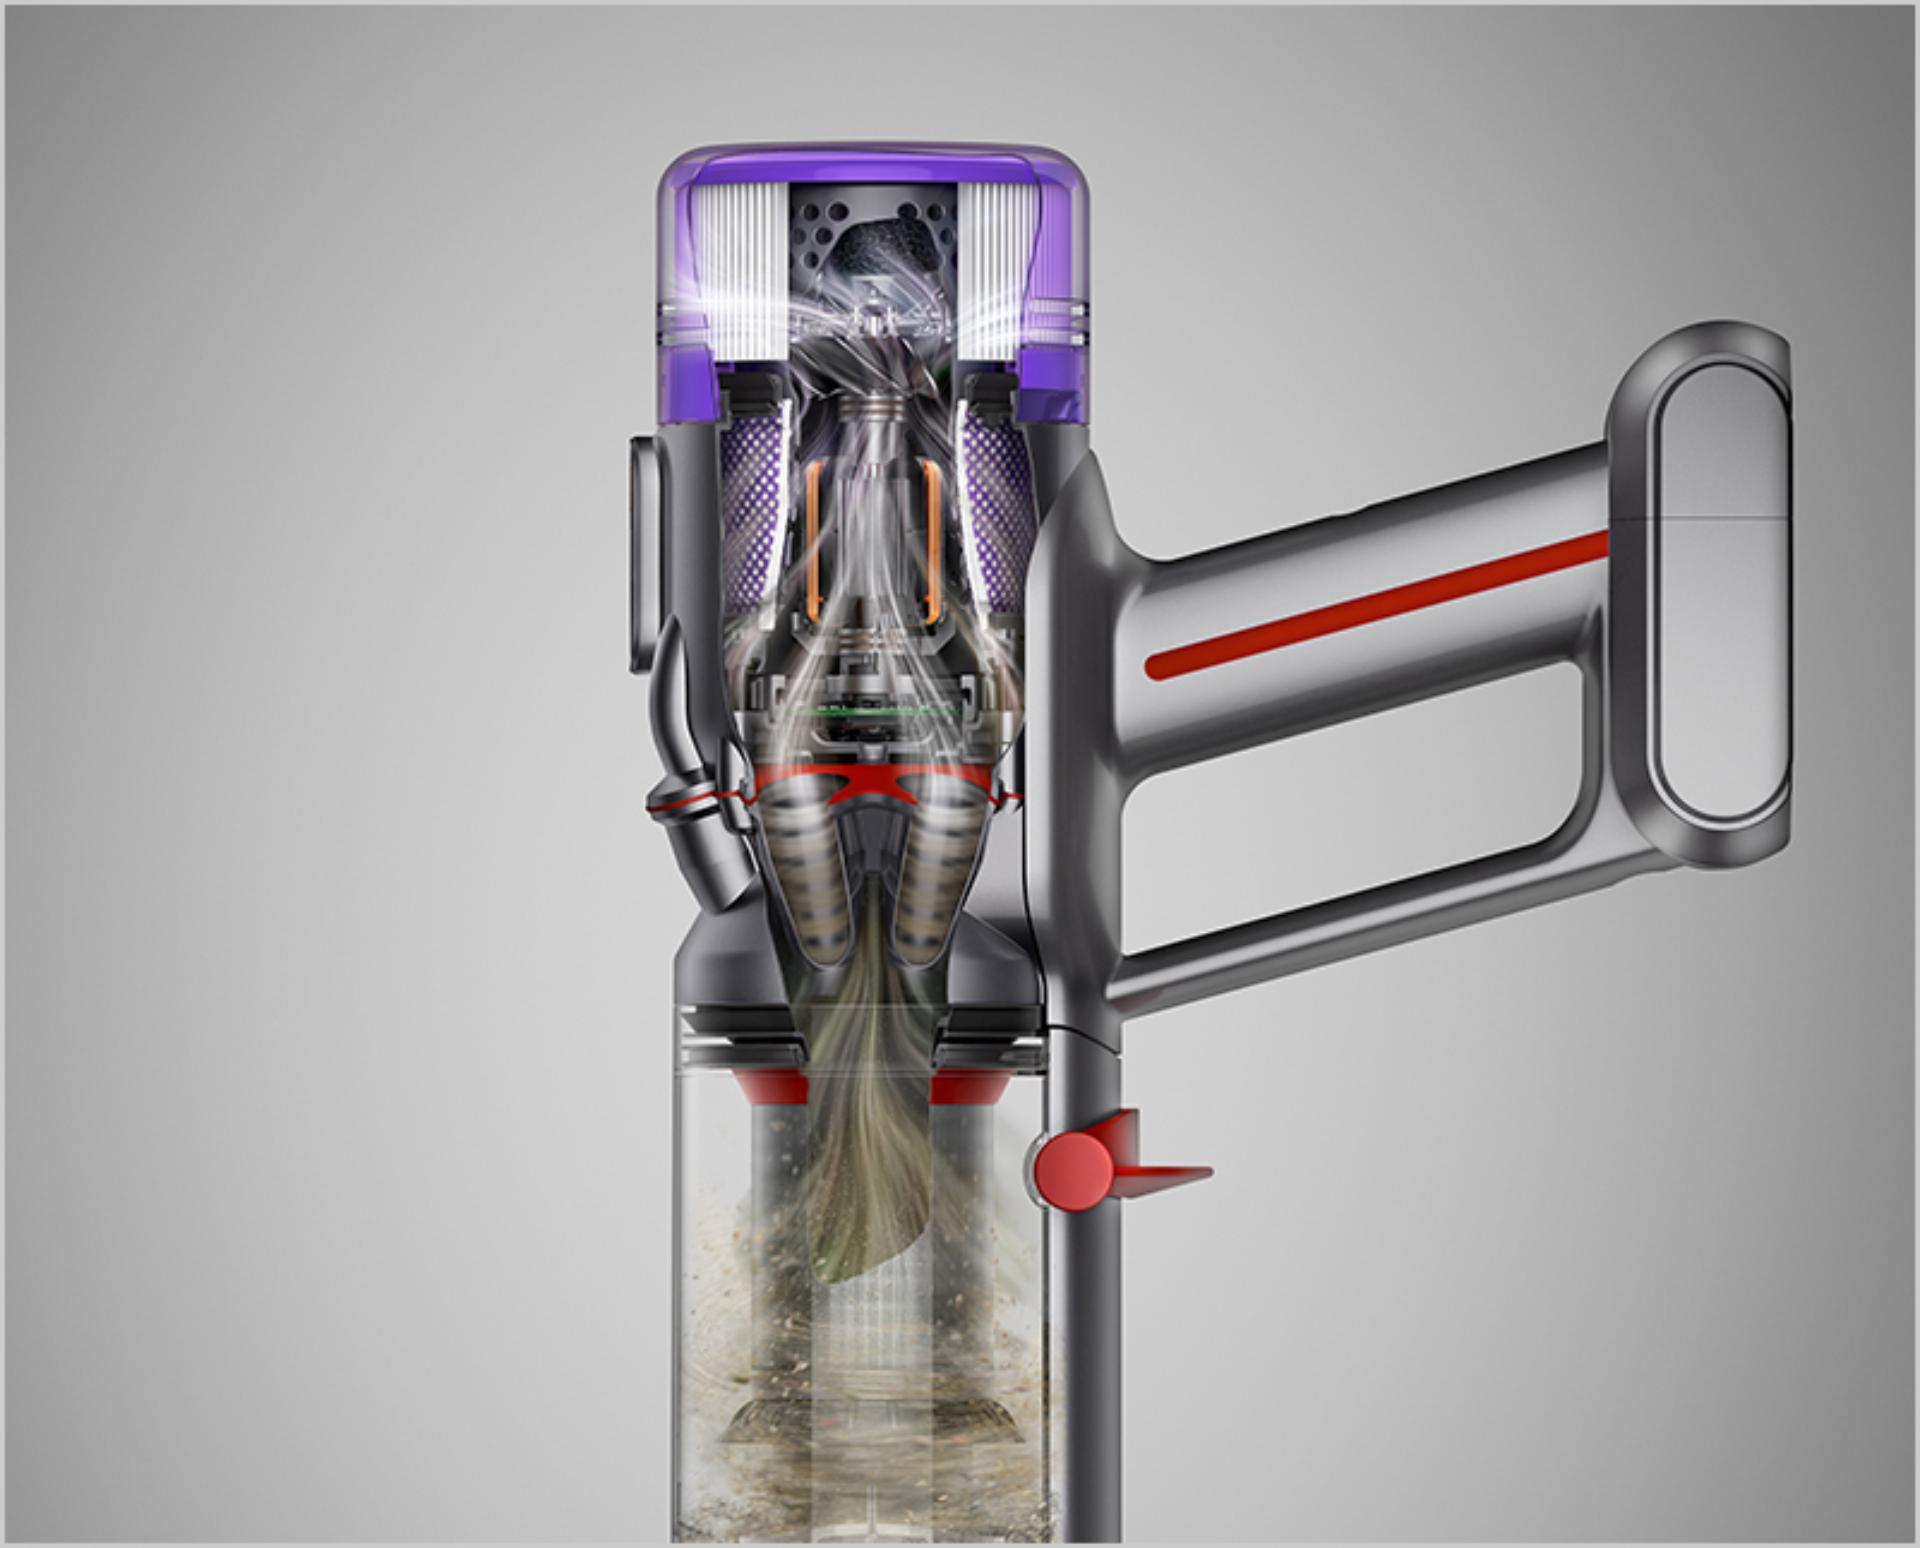 A cutaway of the Dyson Micro filtration system.